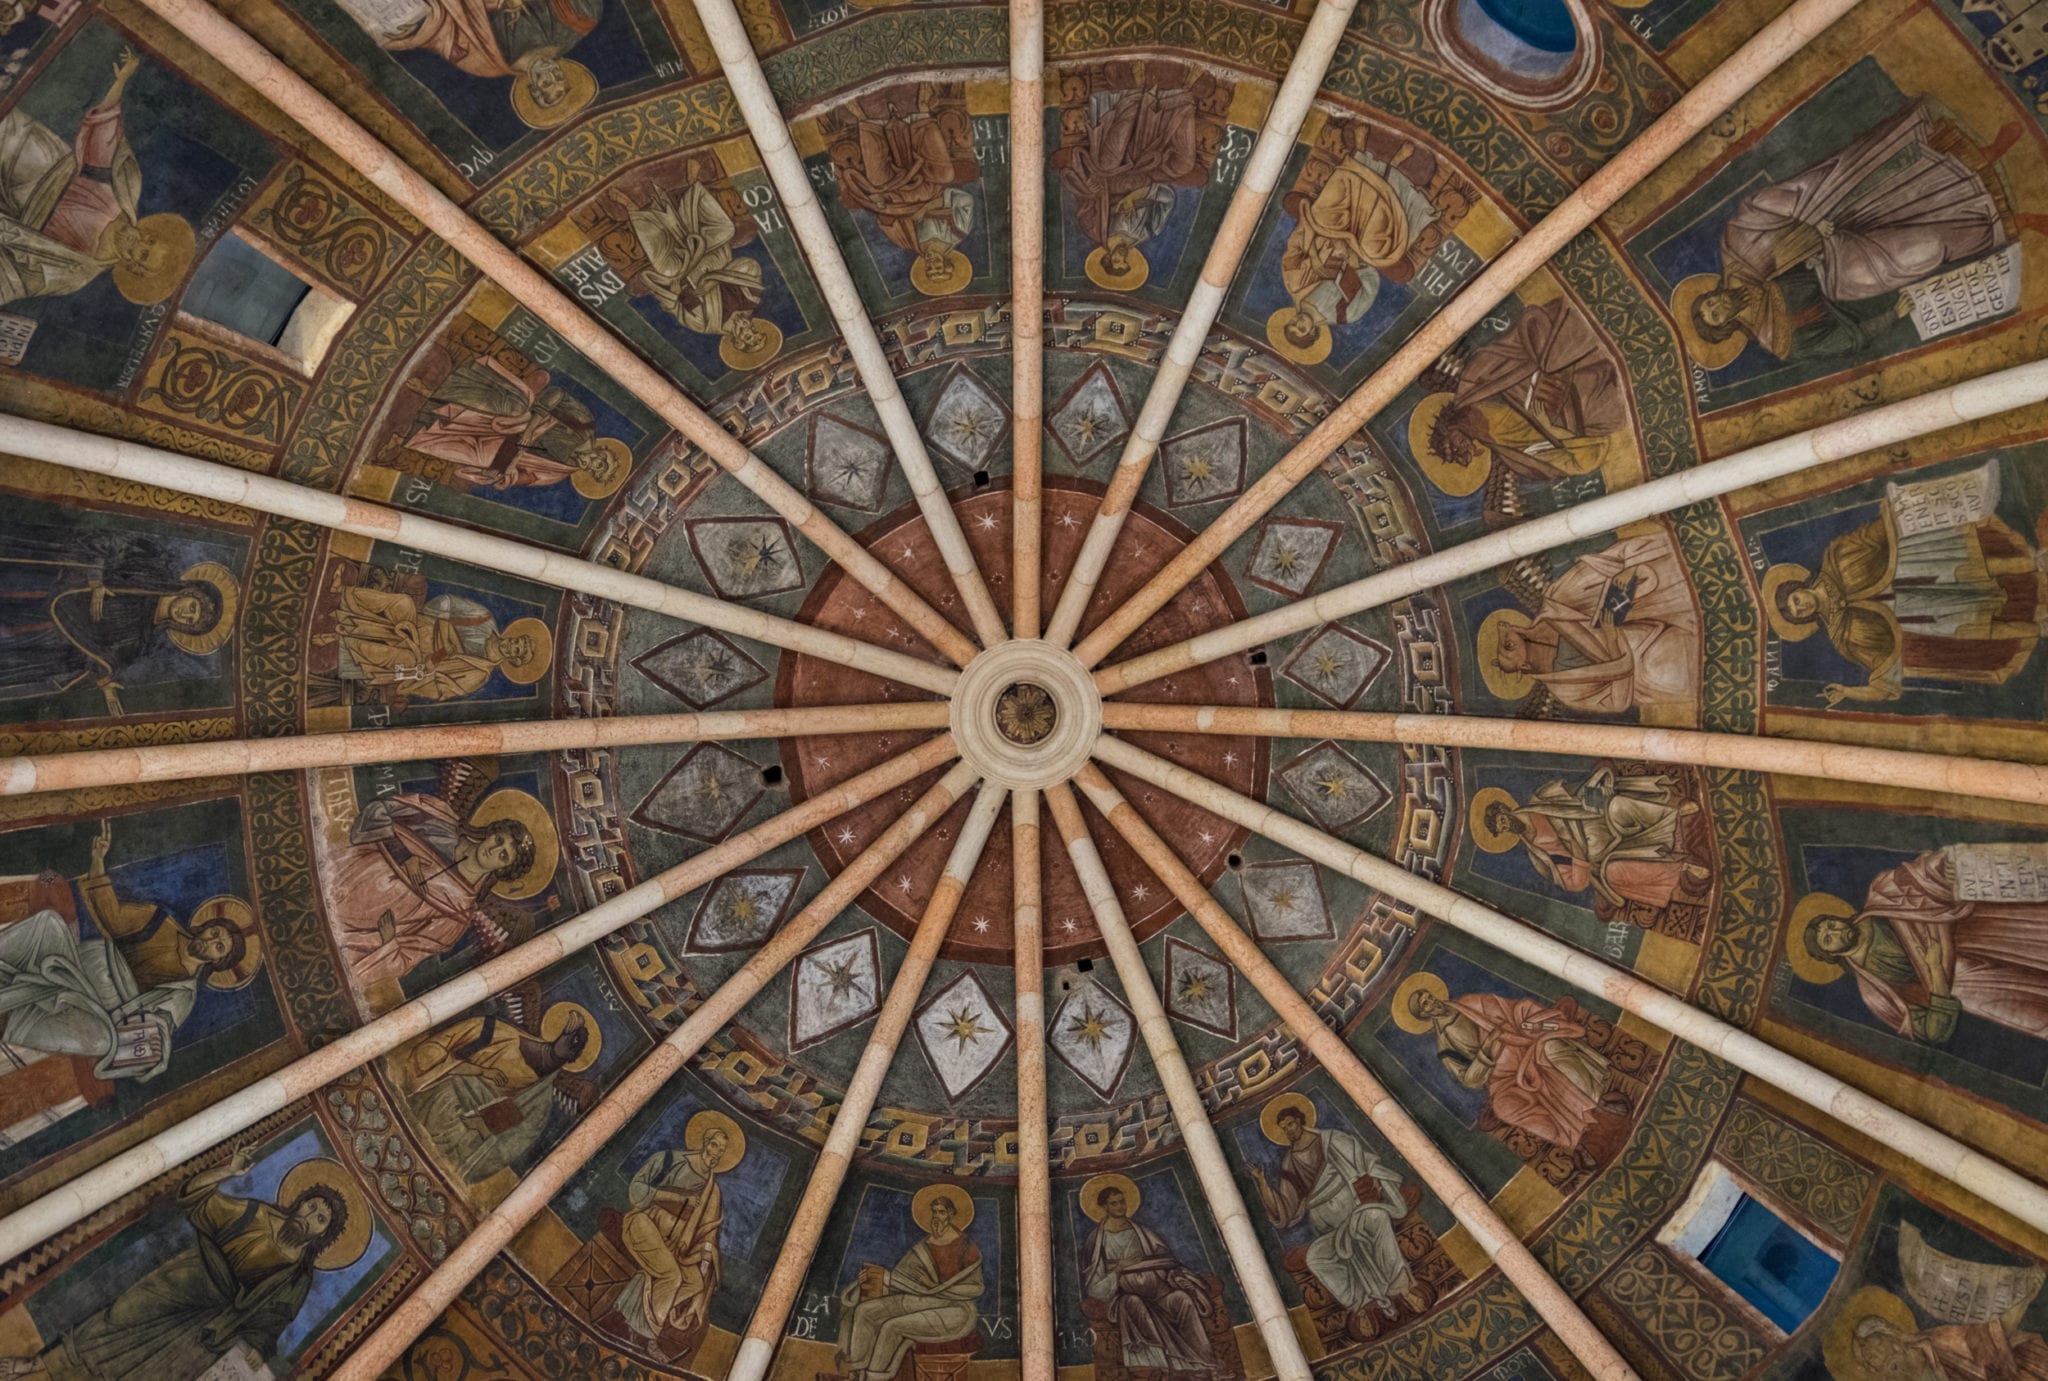 Parma's Baptistery ceiling -- planks leading to the center like a starburst, each segment covered in intricate frescoes.